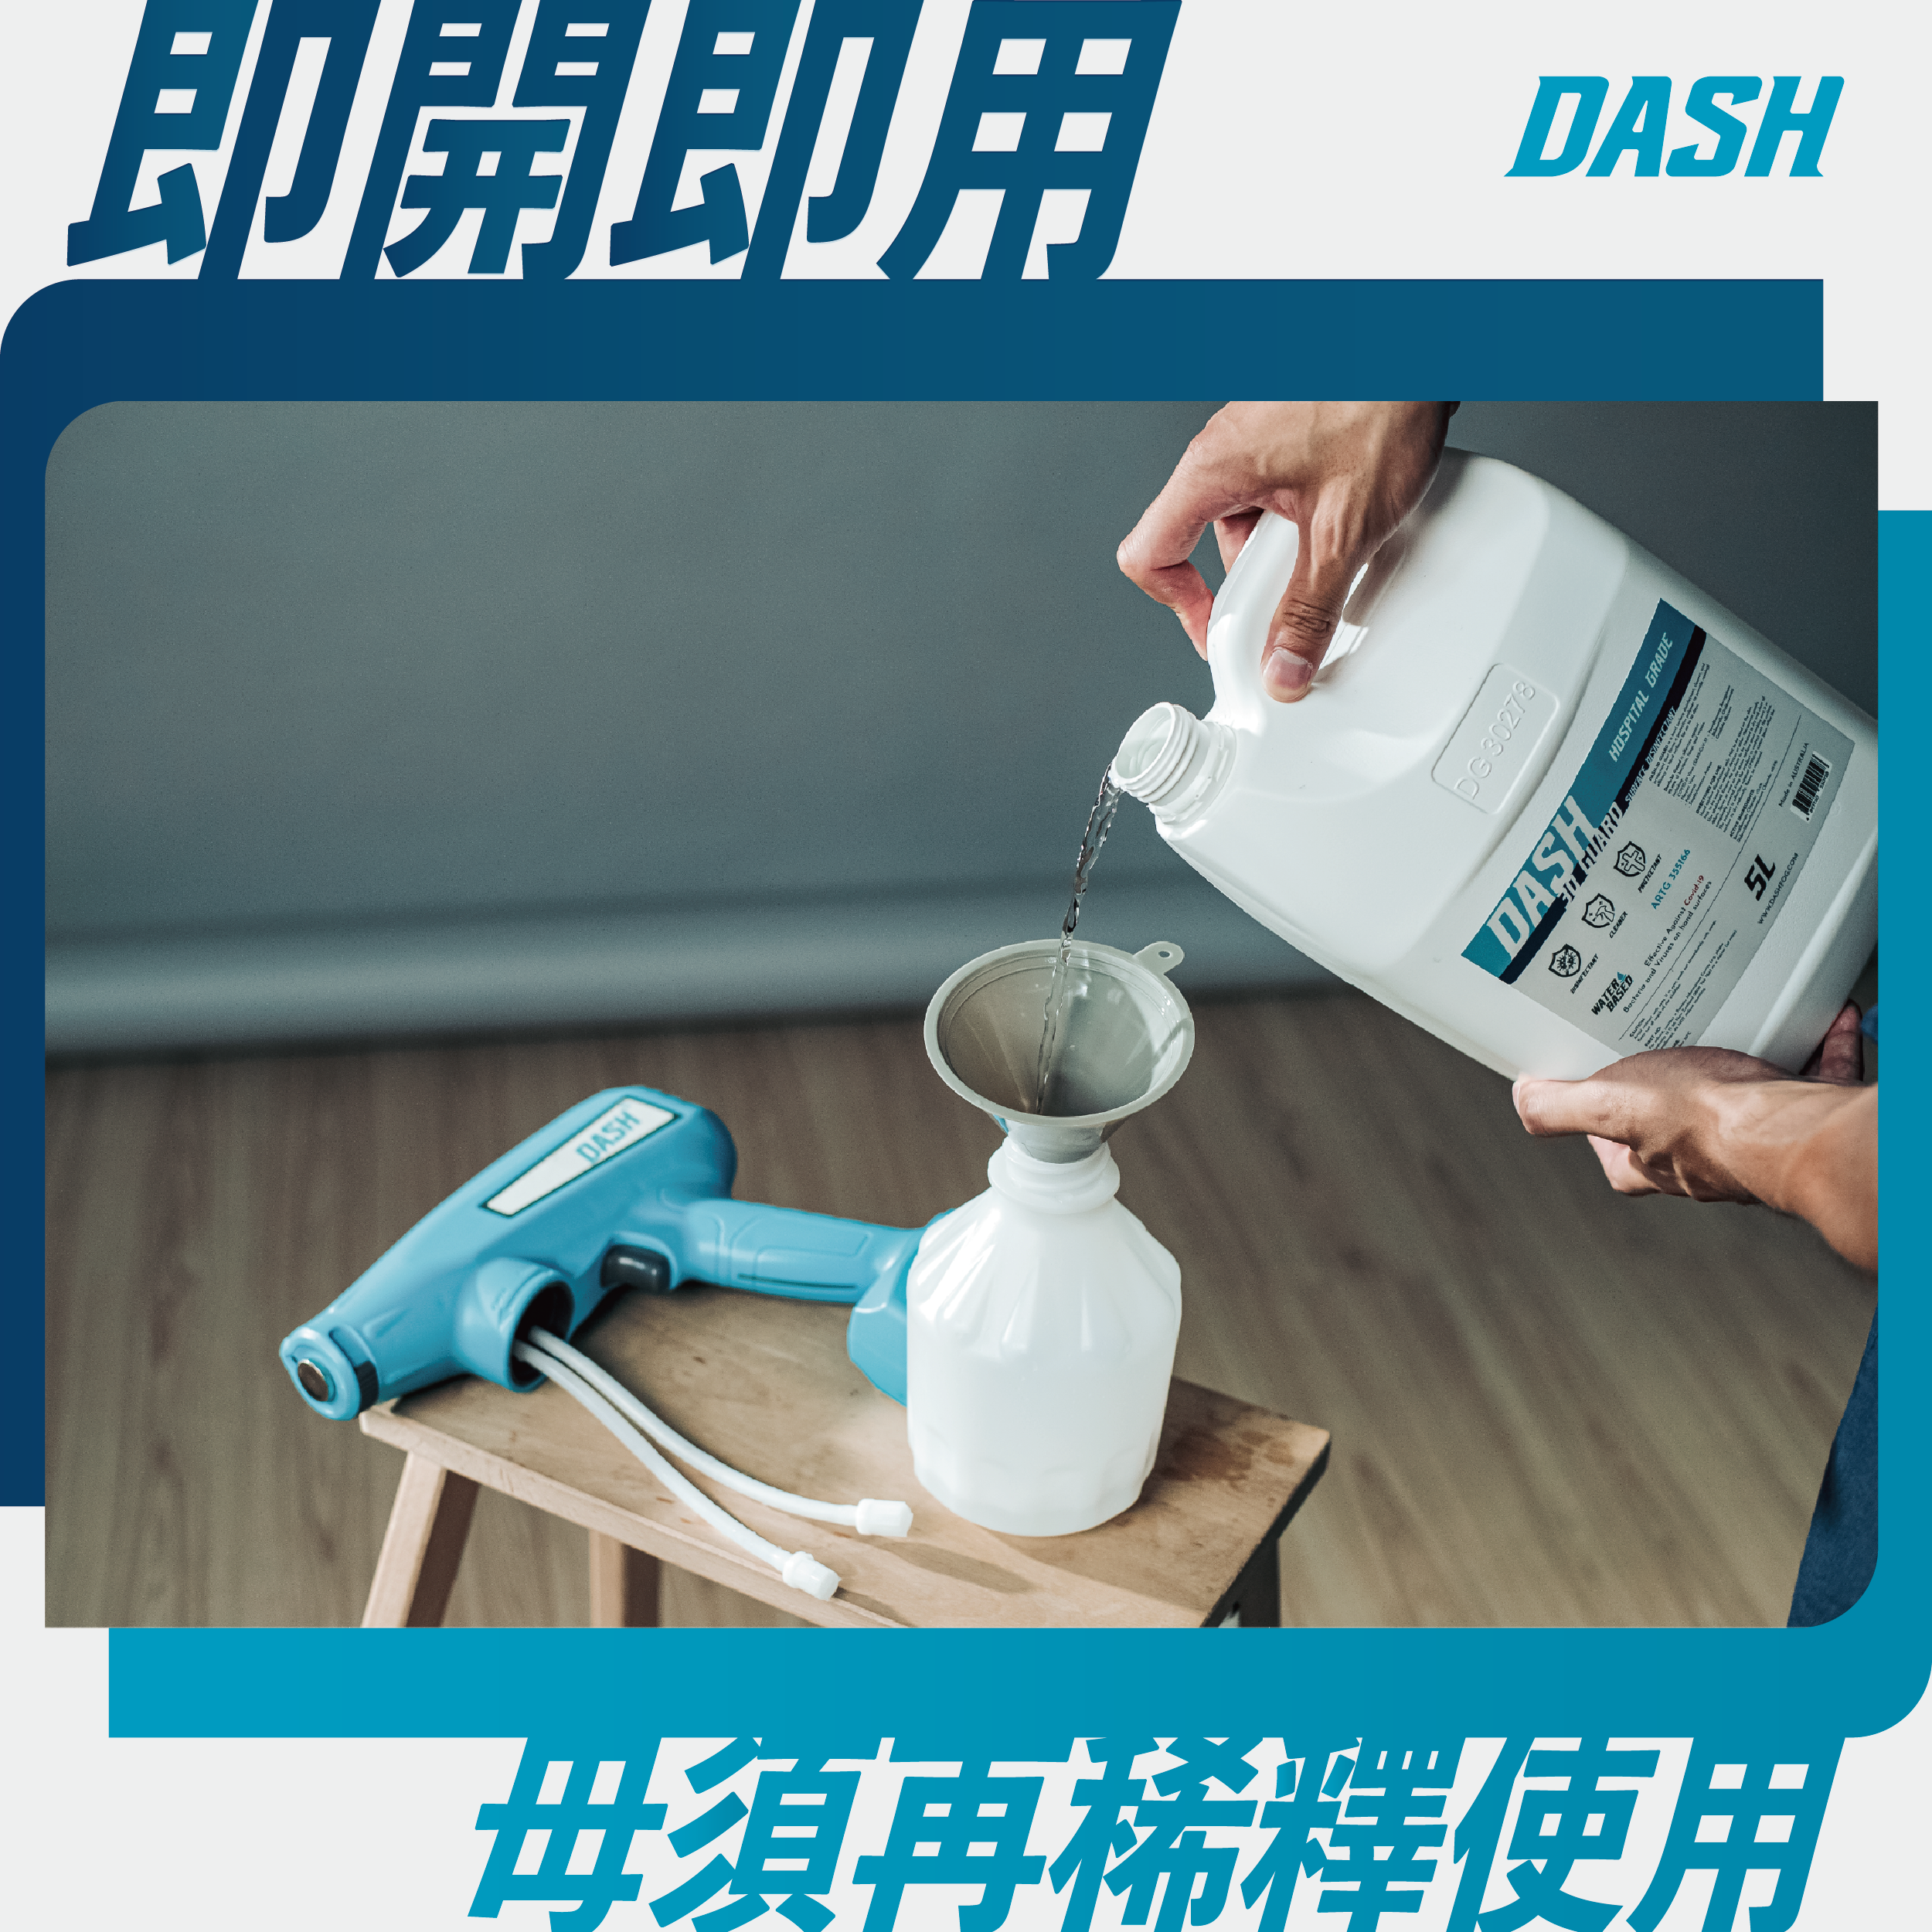 DASH-30 Guard [Selected by Boeing and Airbus] Hospital Grade Antibacterial Disinfectant Coating Disinfectant (5L)